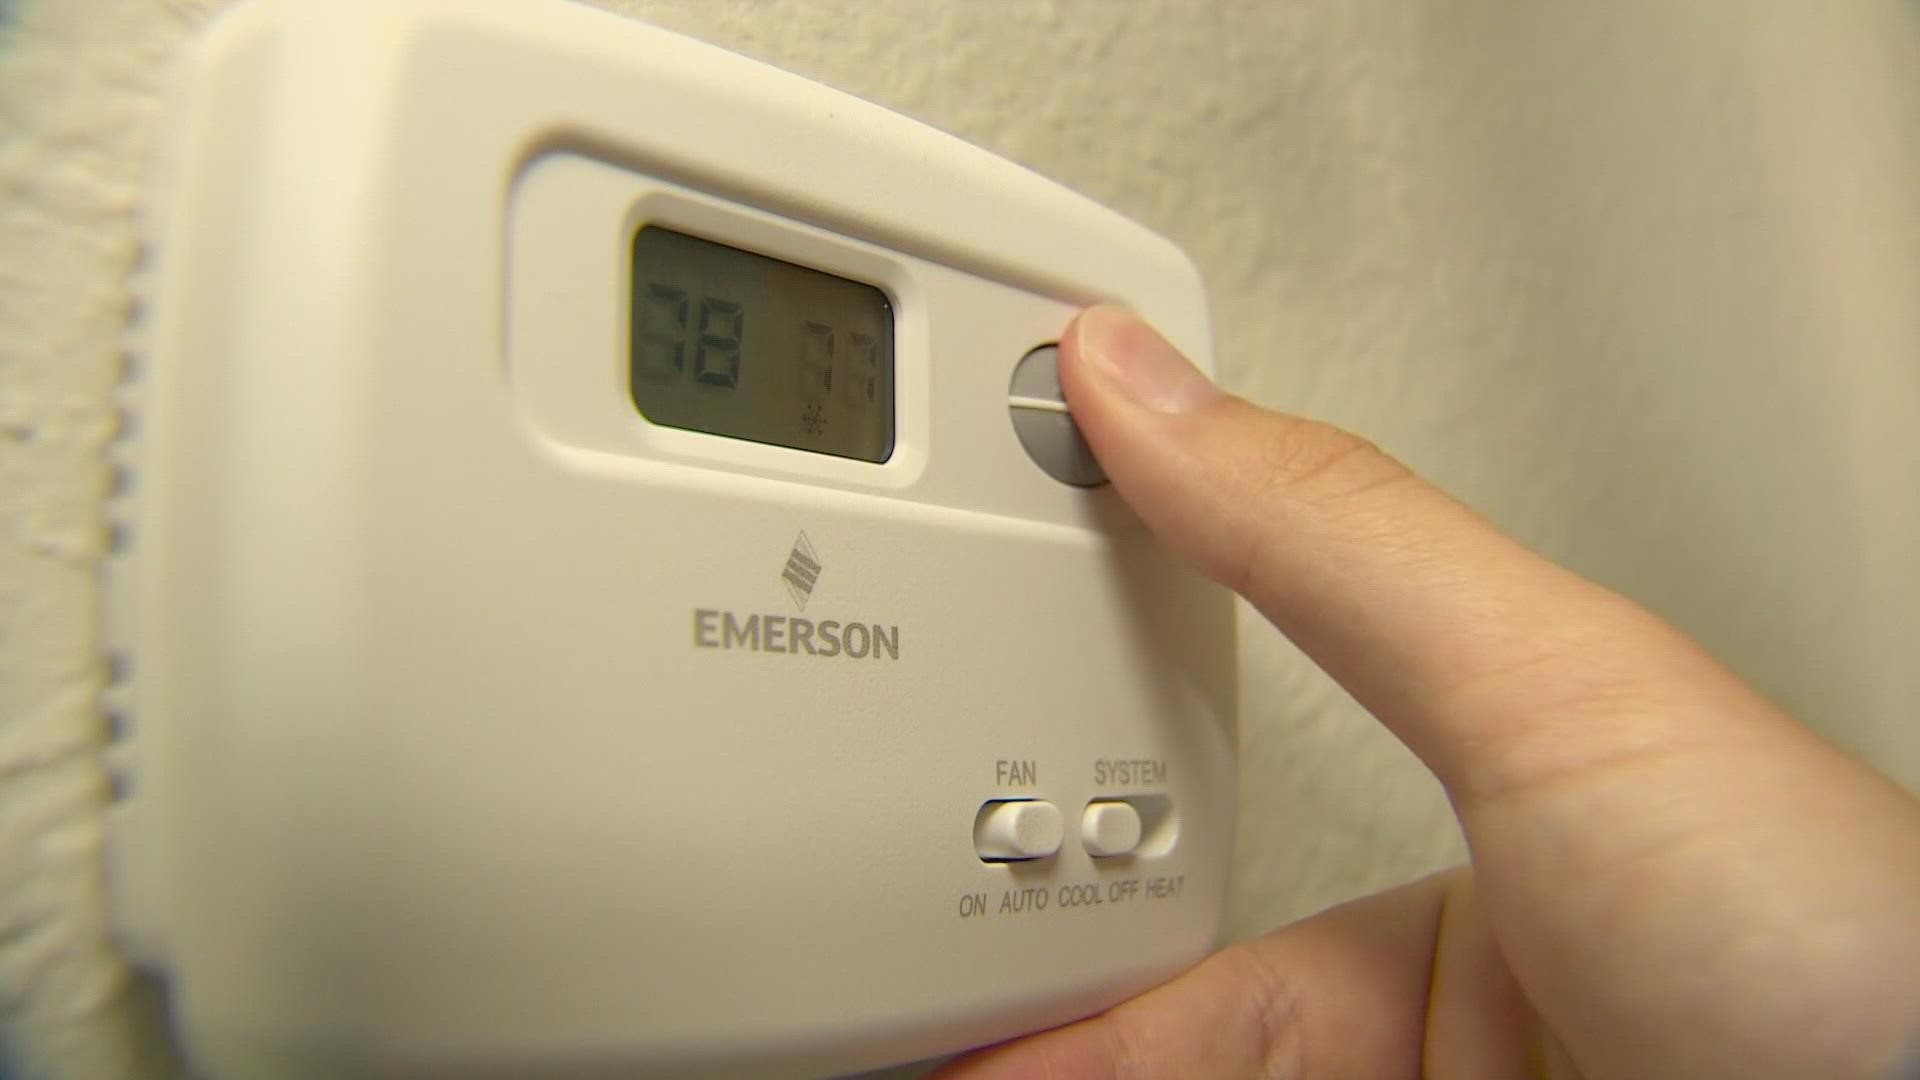 ERCOT is asking people to set their thermostats to 78 degrees to conserve energy during this heatwave, but how did they determine that number?